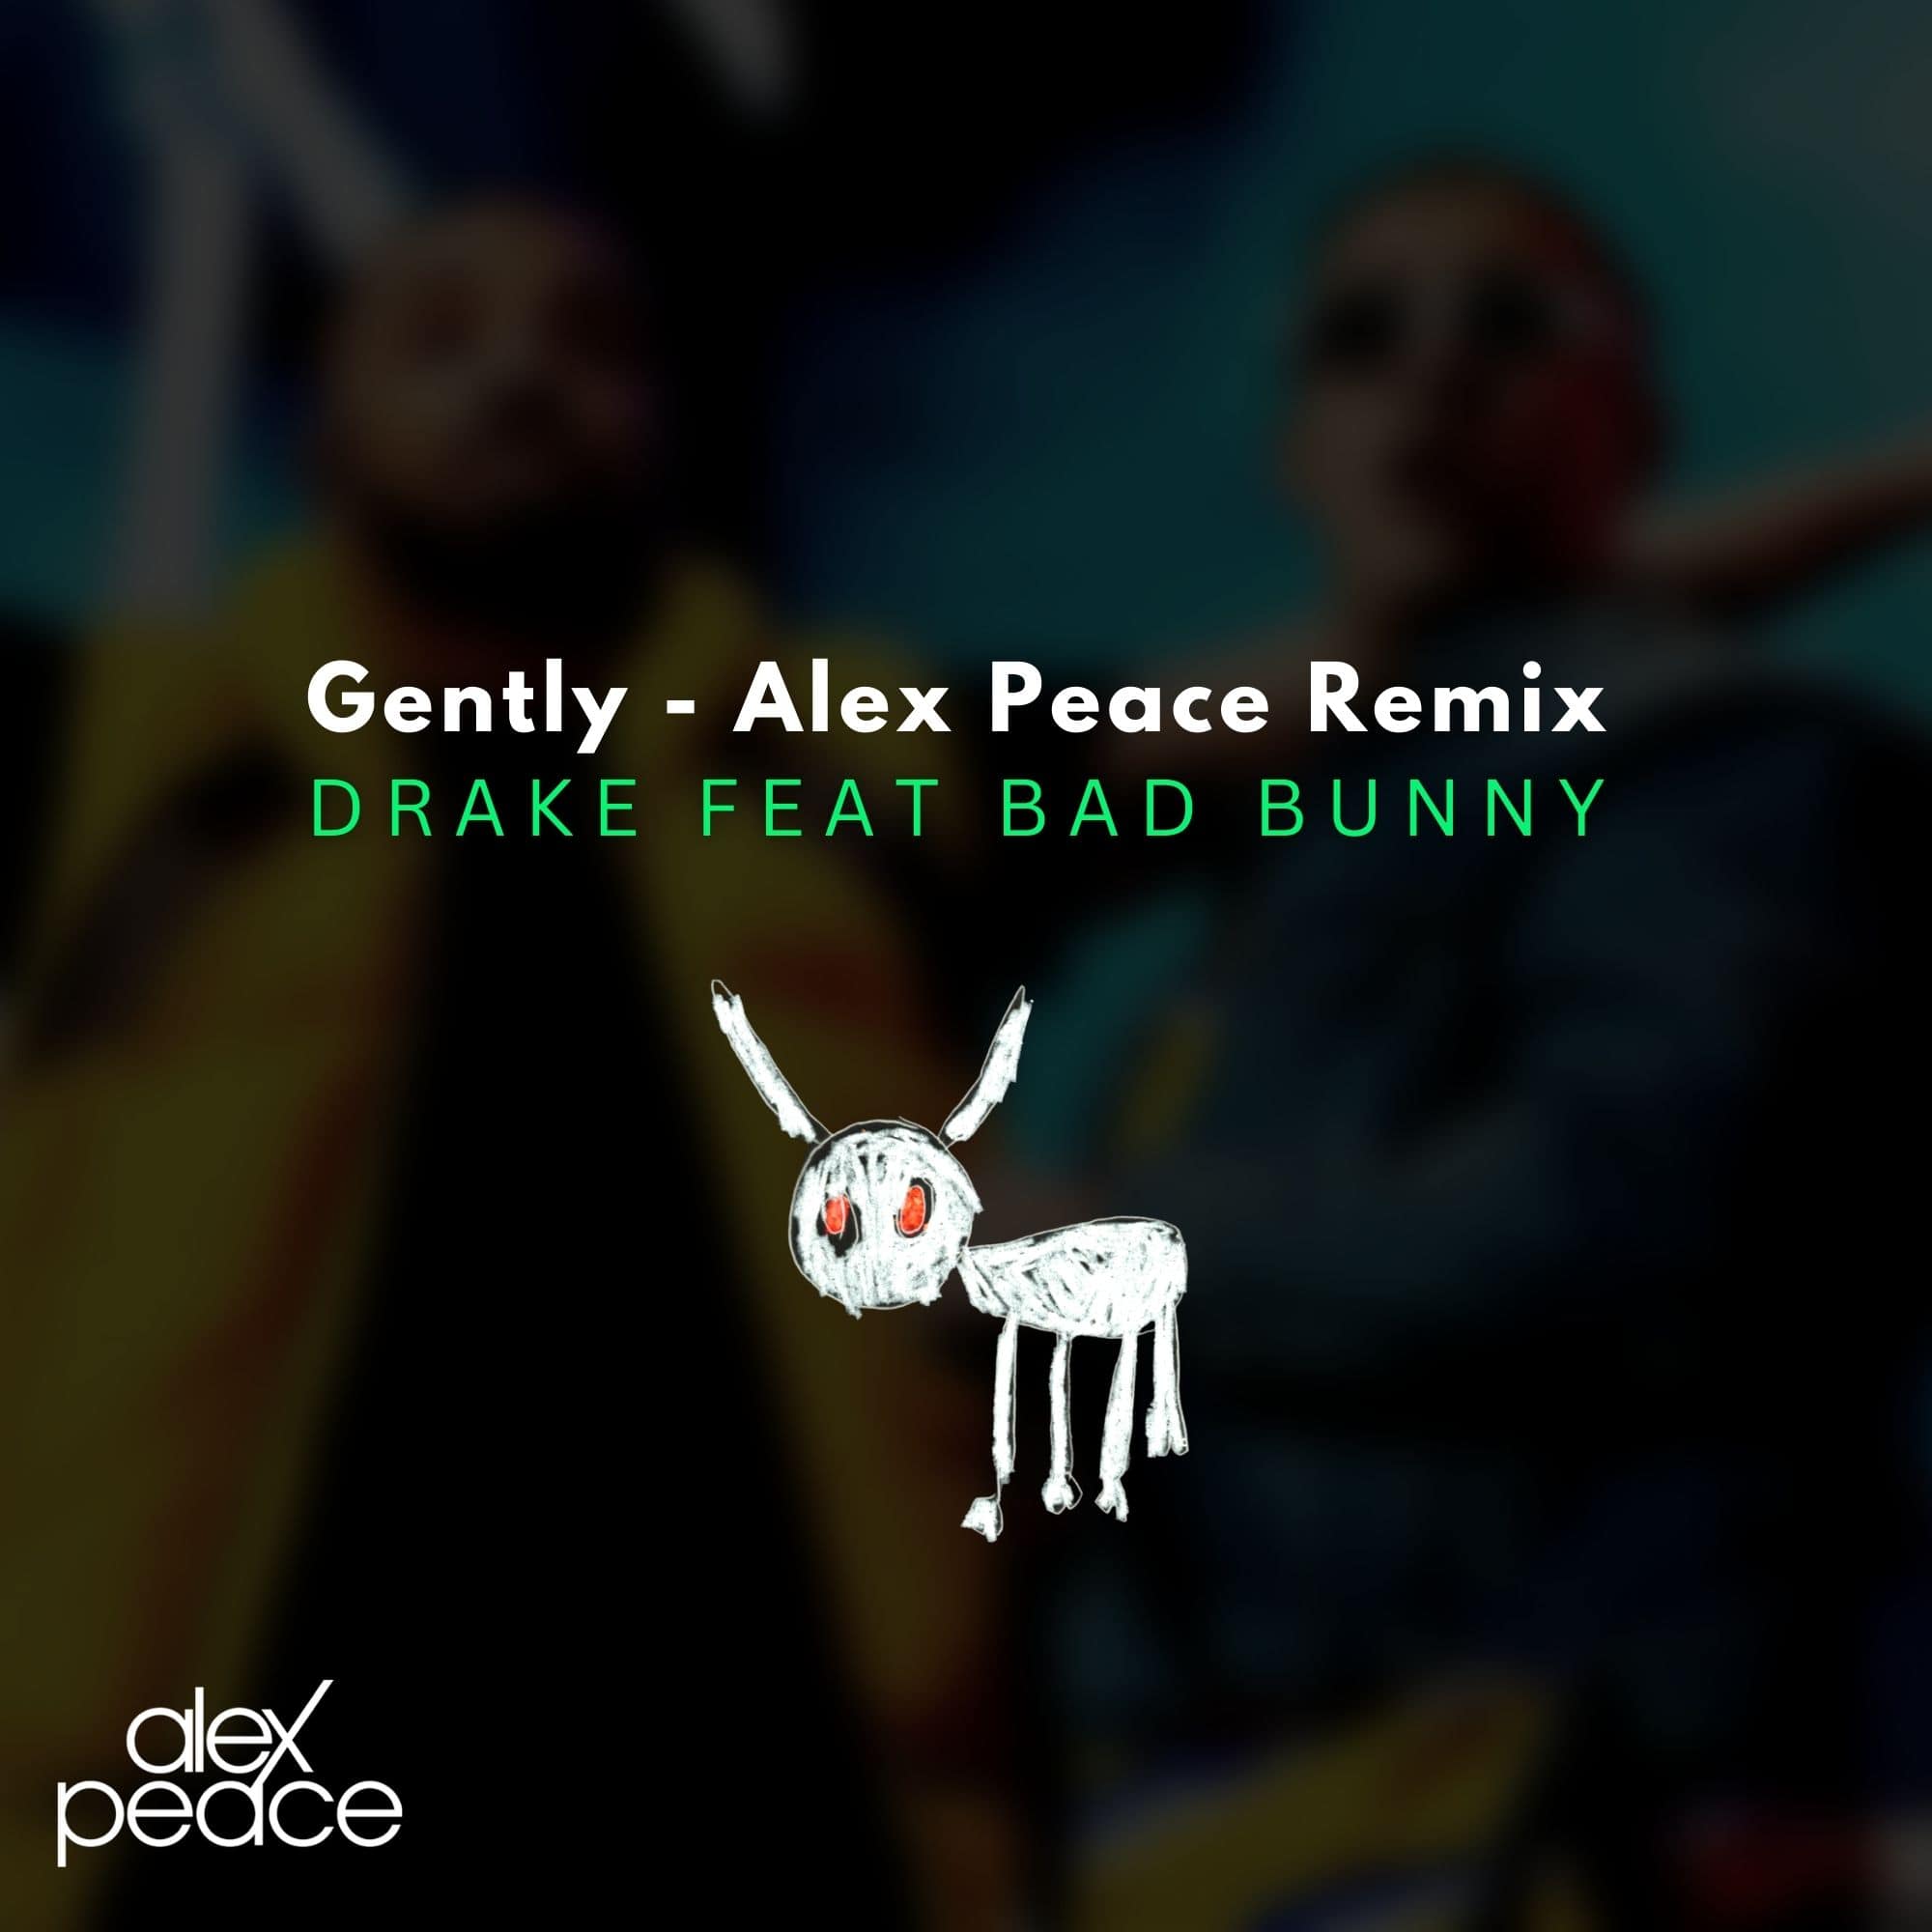 Drake feat Bad Bunny – Gently (Alex Peace Remix)